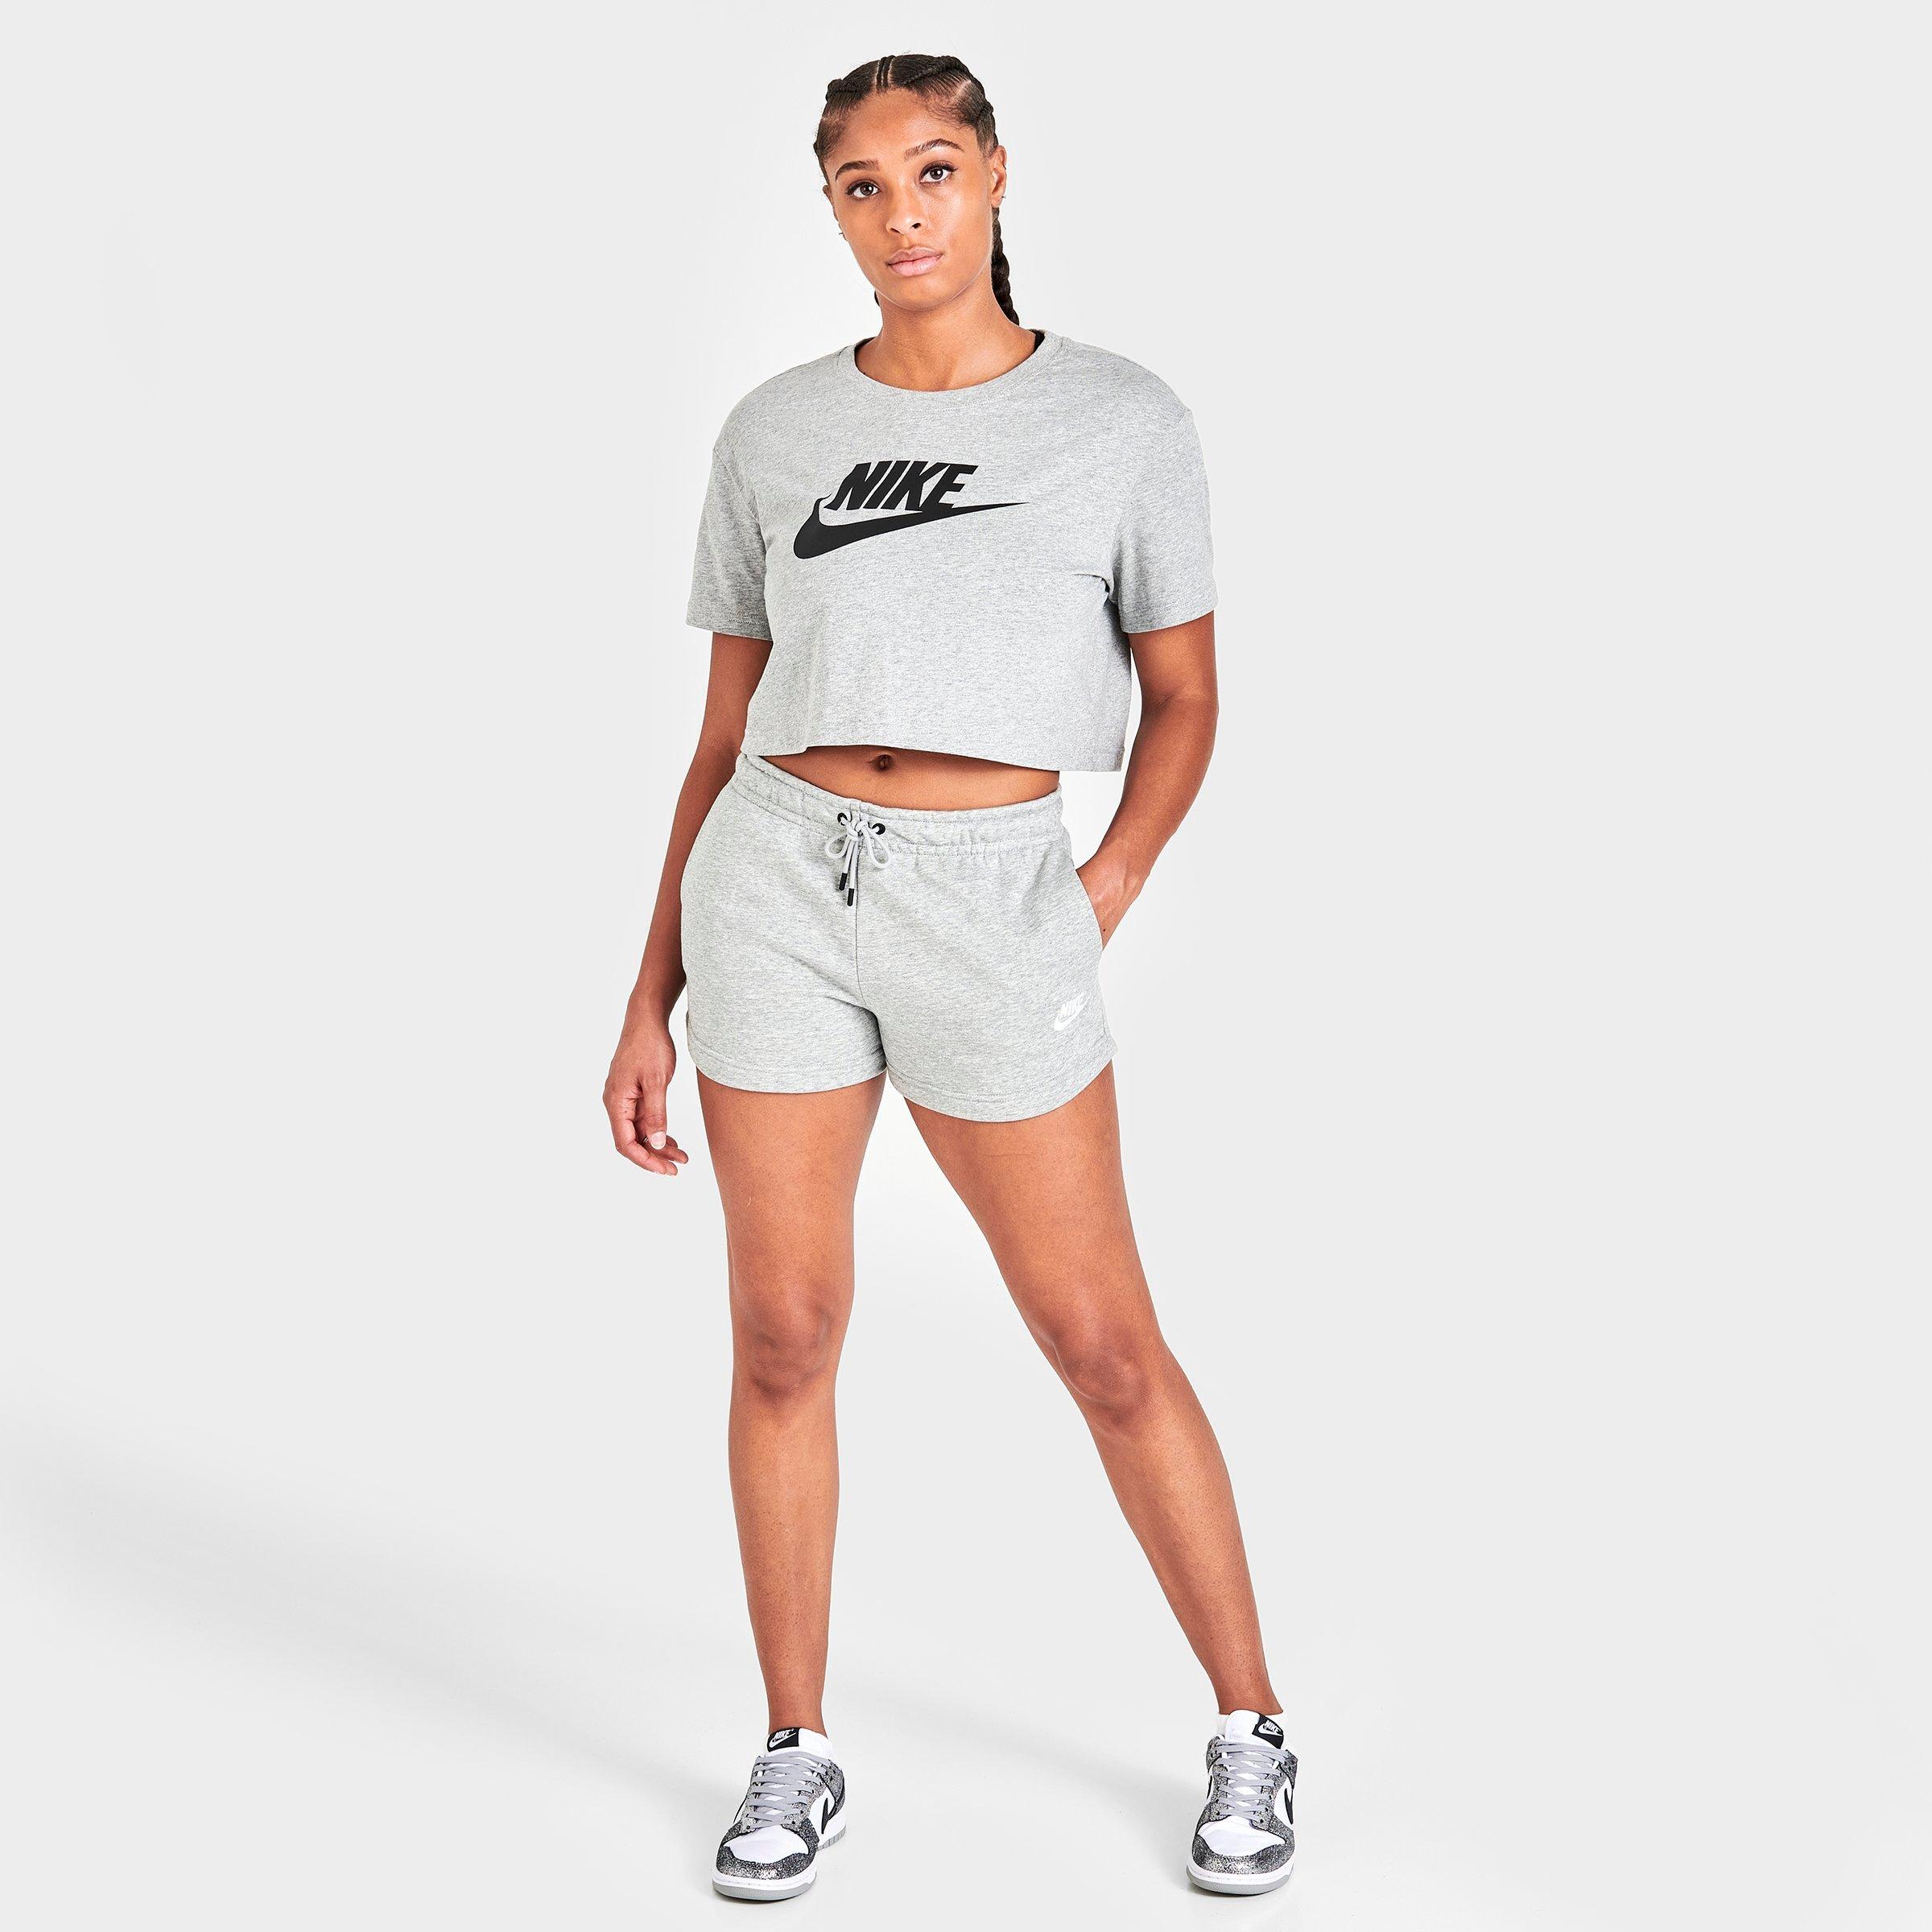 womens french terry shorts nike